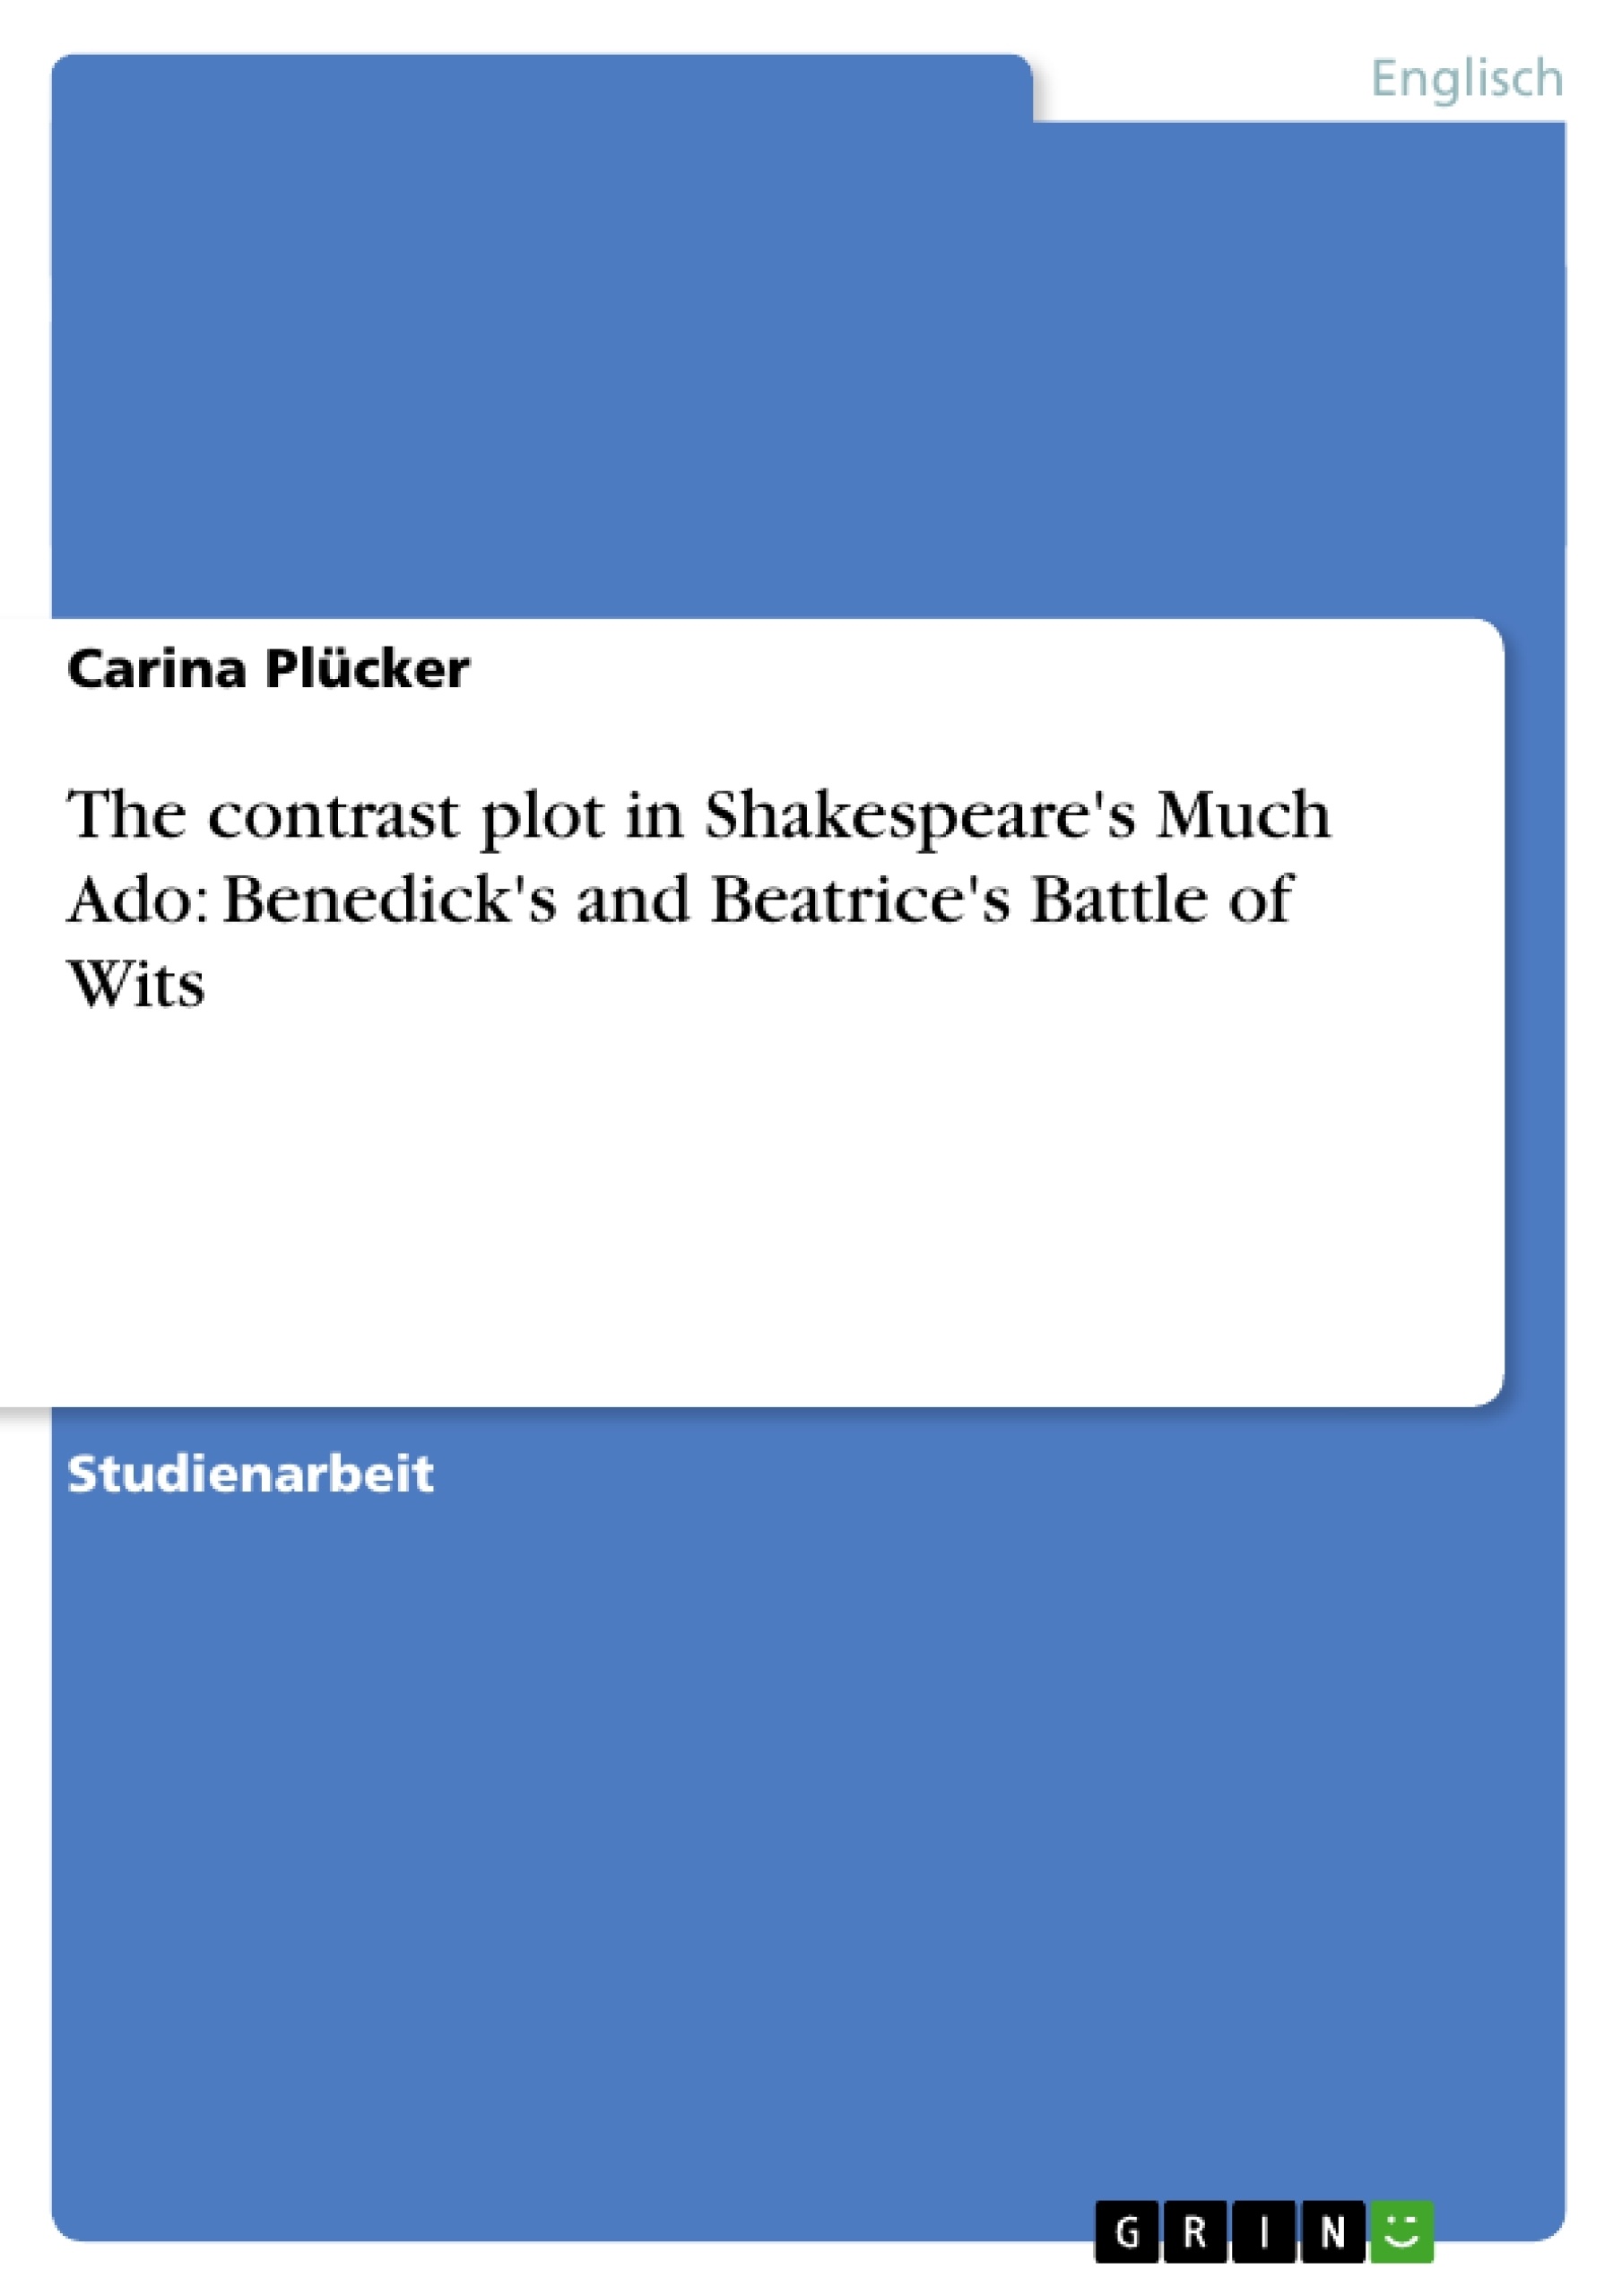 Titel: The contrast plot in Shakespeare's Much Ado: Benedick's and Beatrice's Battle of Wits